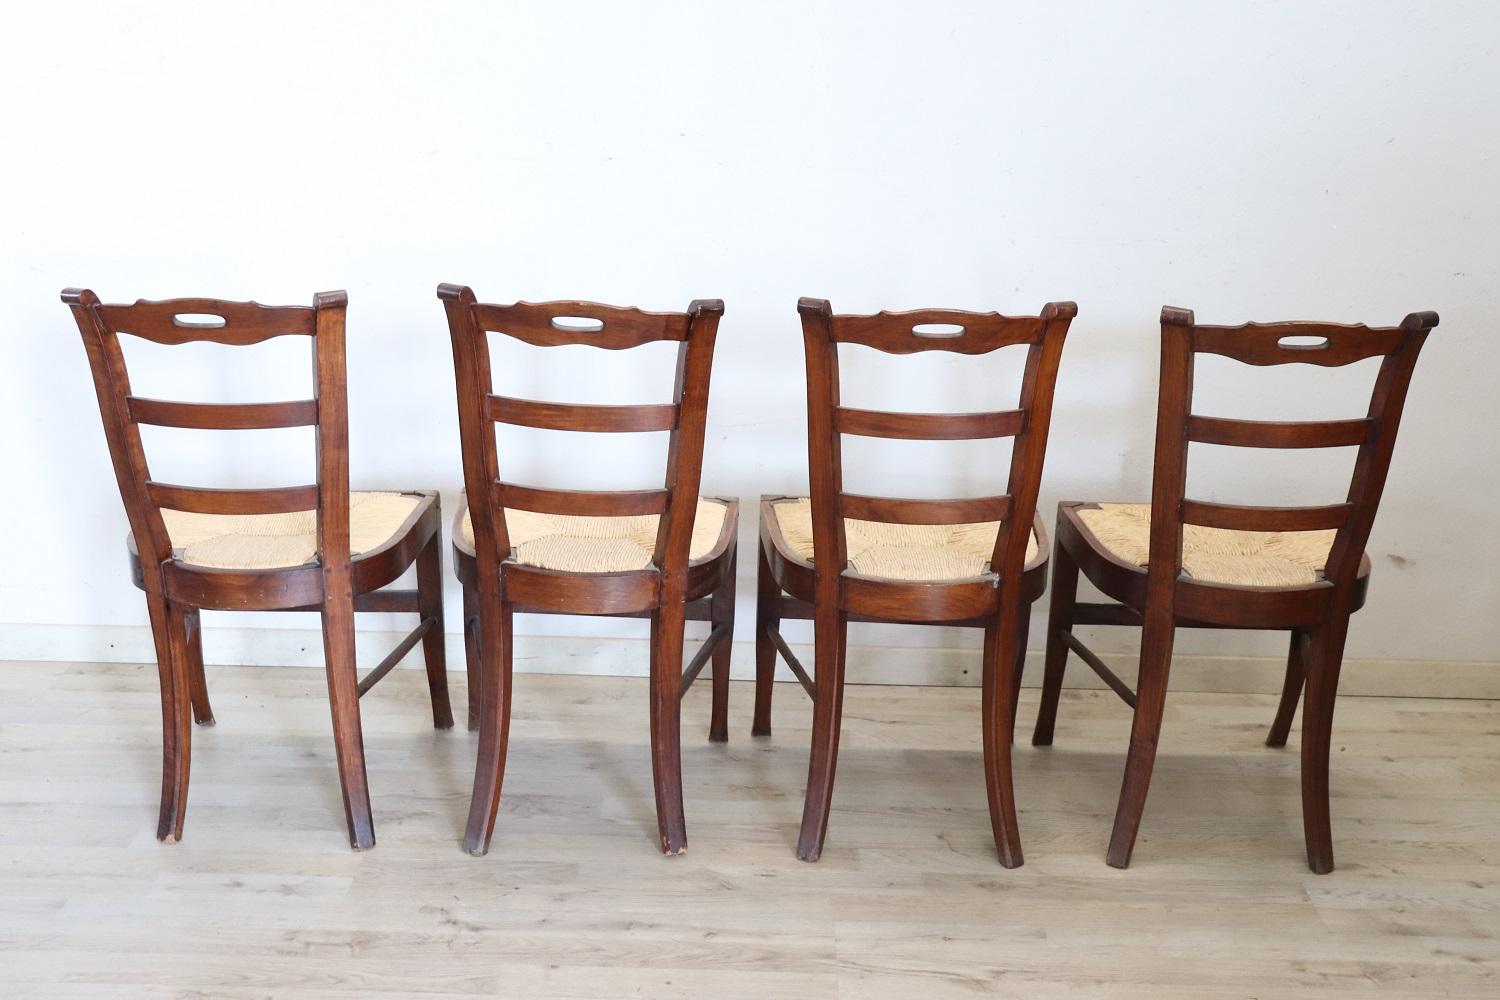 19th Century Set of Four Antique Chairs in Cherry Wood with Straw Seat In Good Condition For Sale In Casale Monferrato, IT